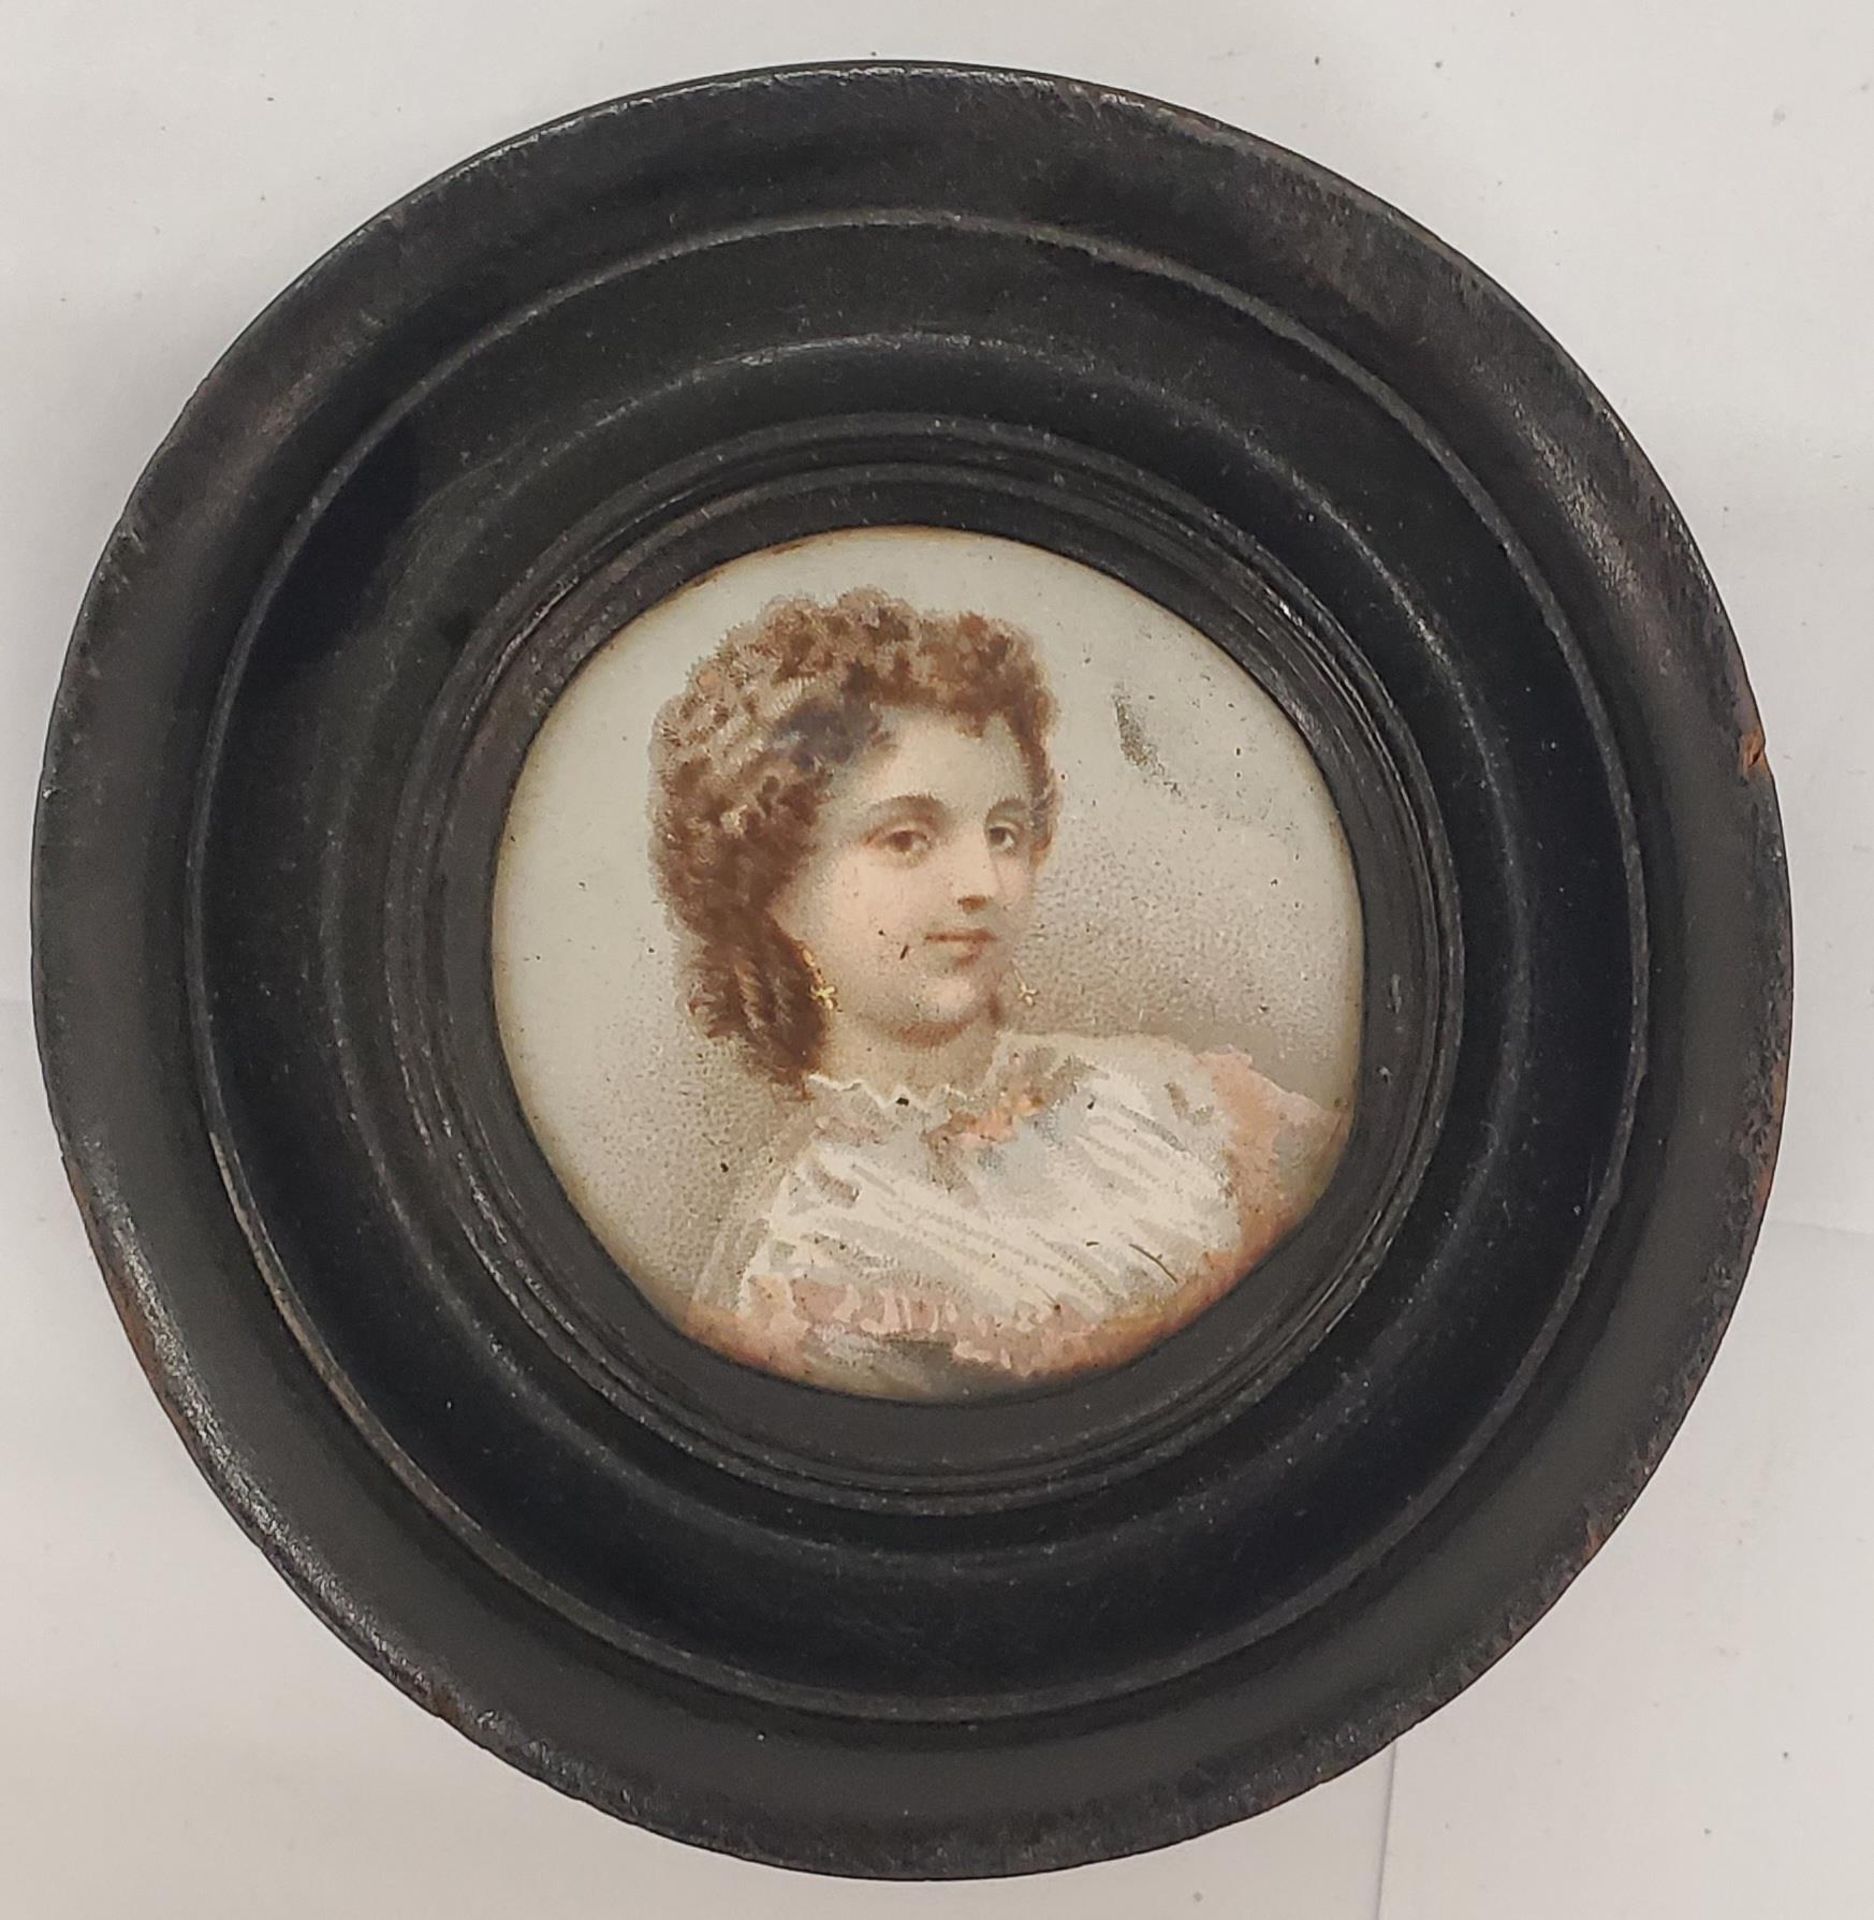 TWO VINTAGE MINIATURE PORTRAITS IN ROUND FRAMES - Image 4 of 5